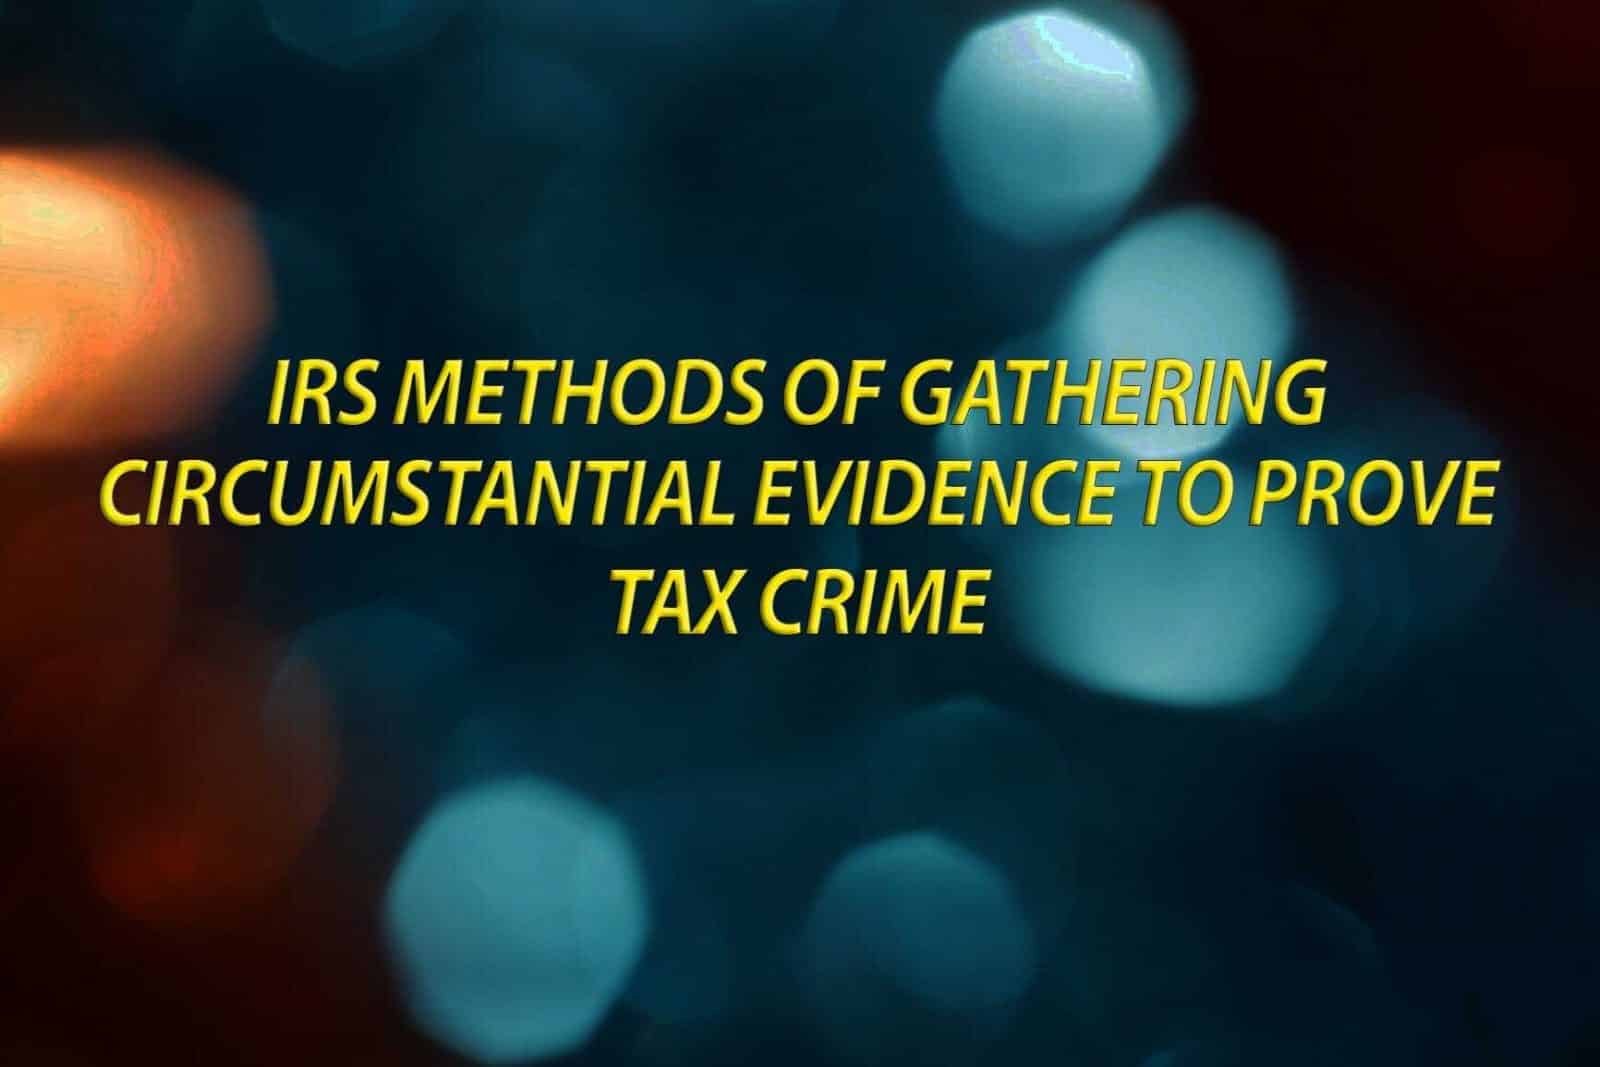 IRS methods of gathering circumstantial evidence